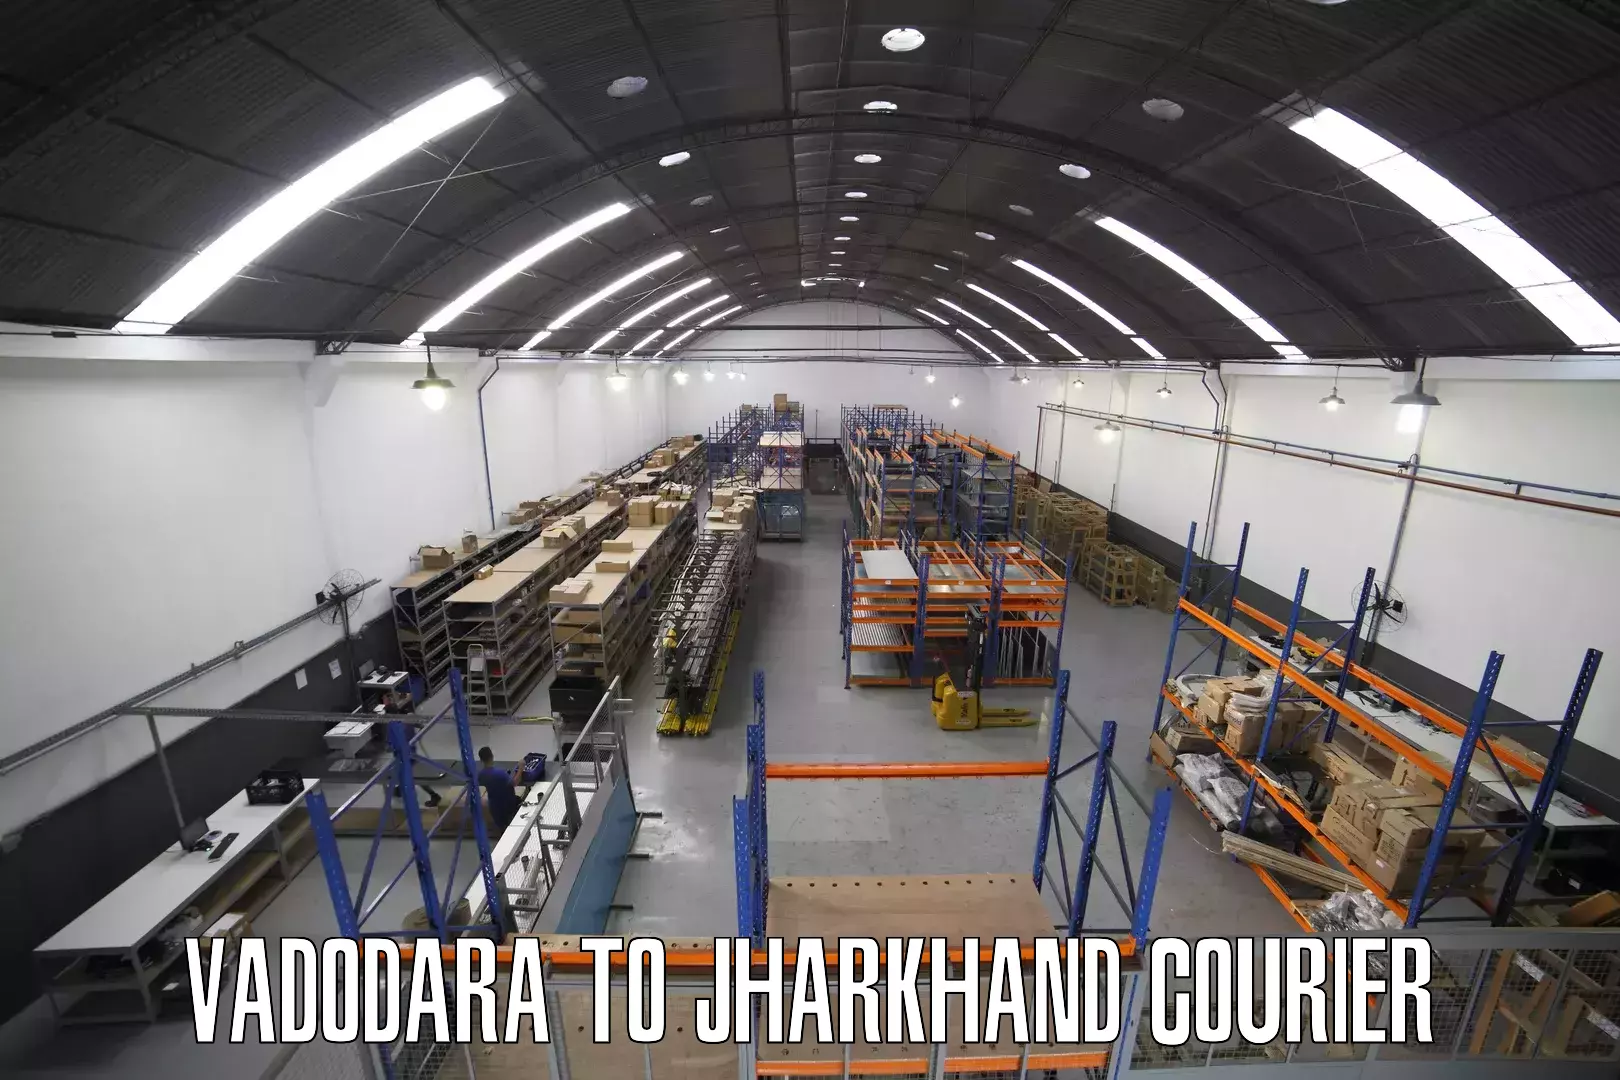 State-of-the-art courier technology in Vadodara to Chatra